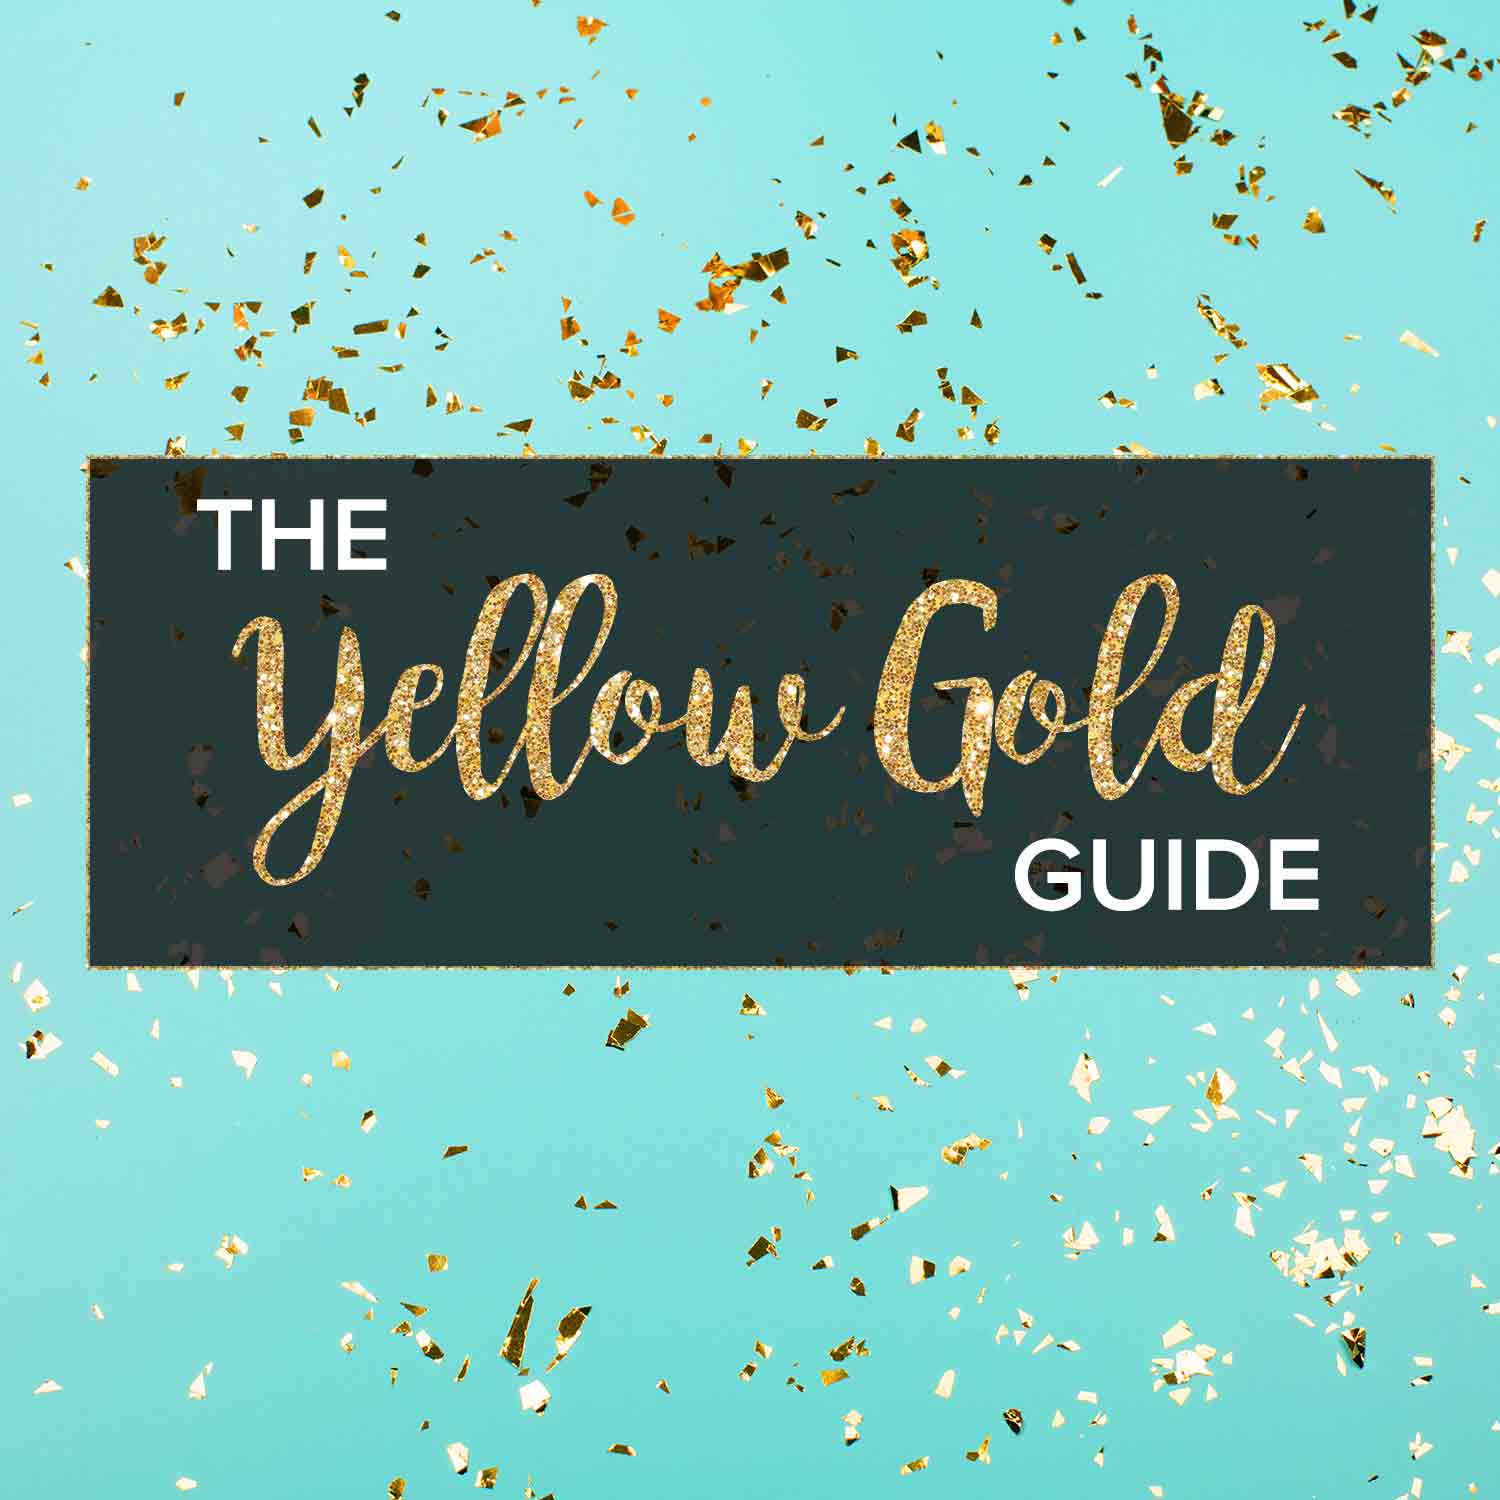 The yellow gold guide.